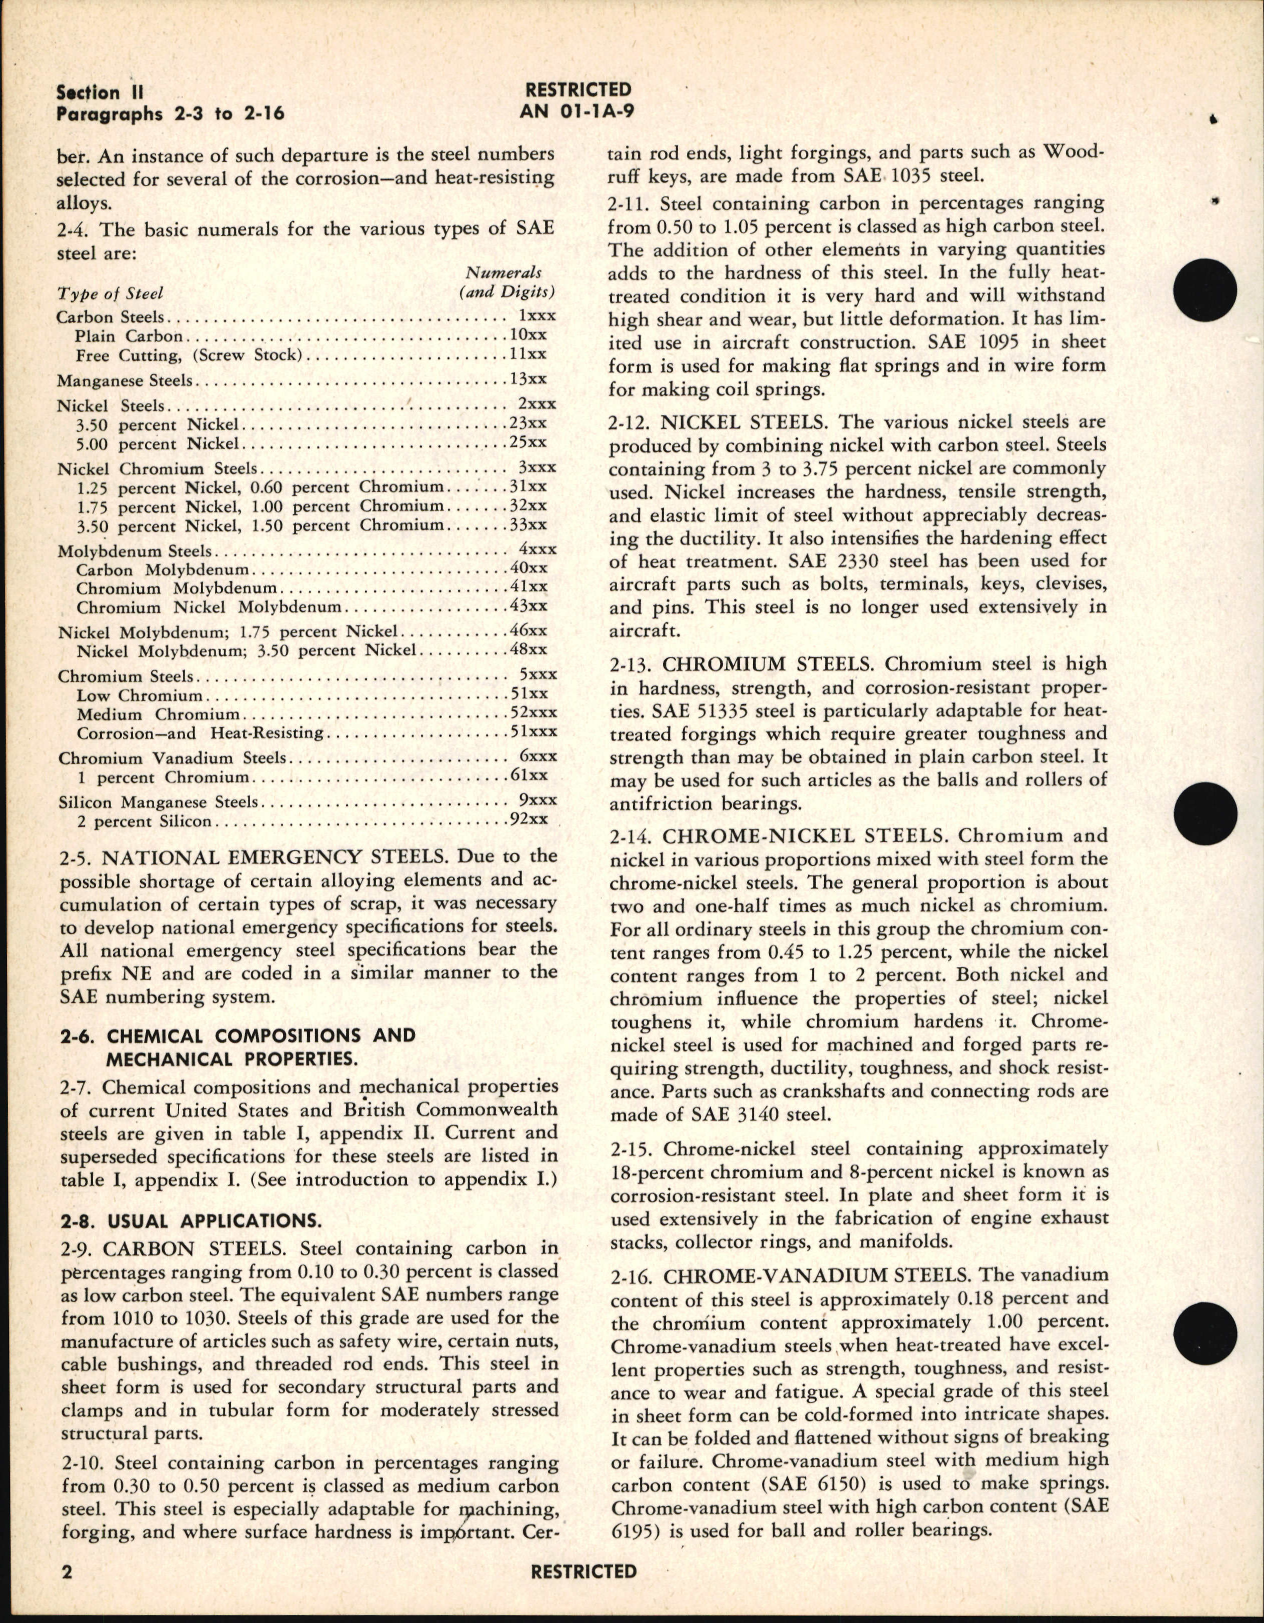 Sample page 8 from AirCorps Library document: United States and British Commonwealth of Nations Aircraft Metals